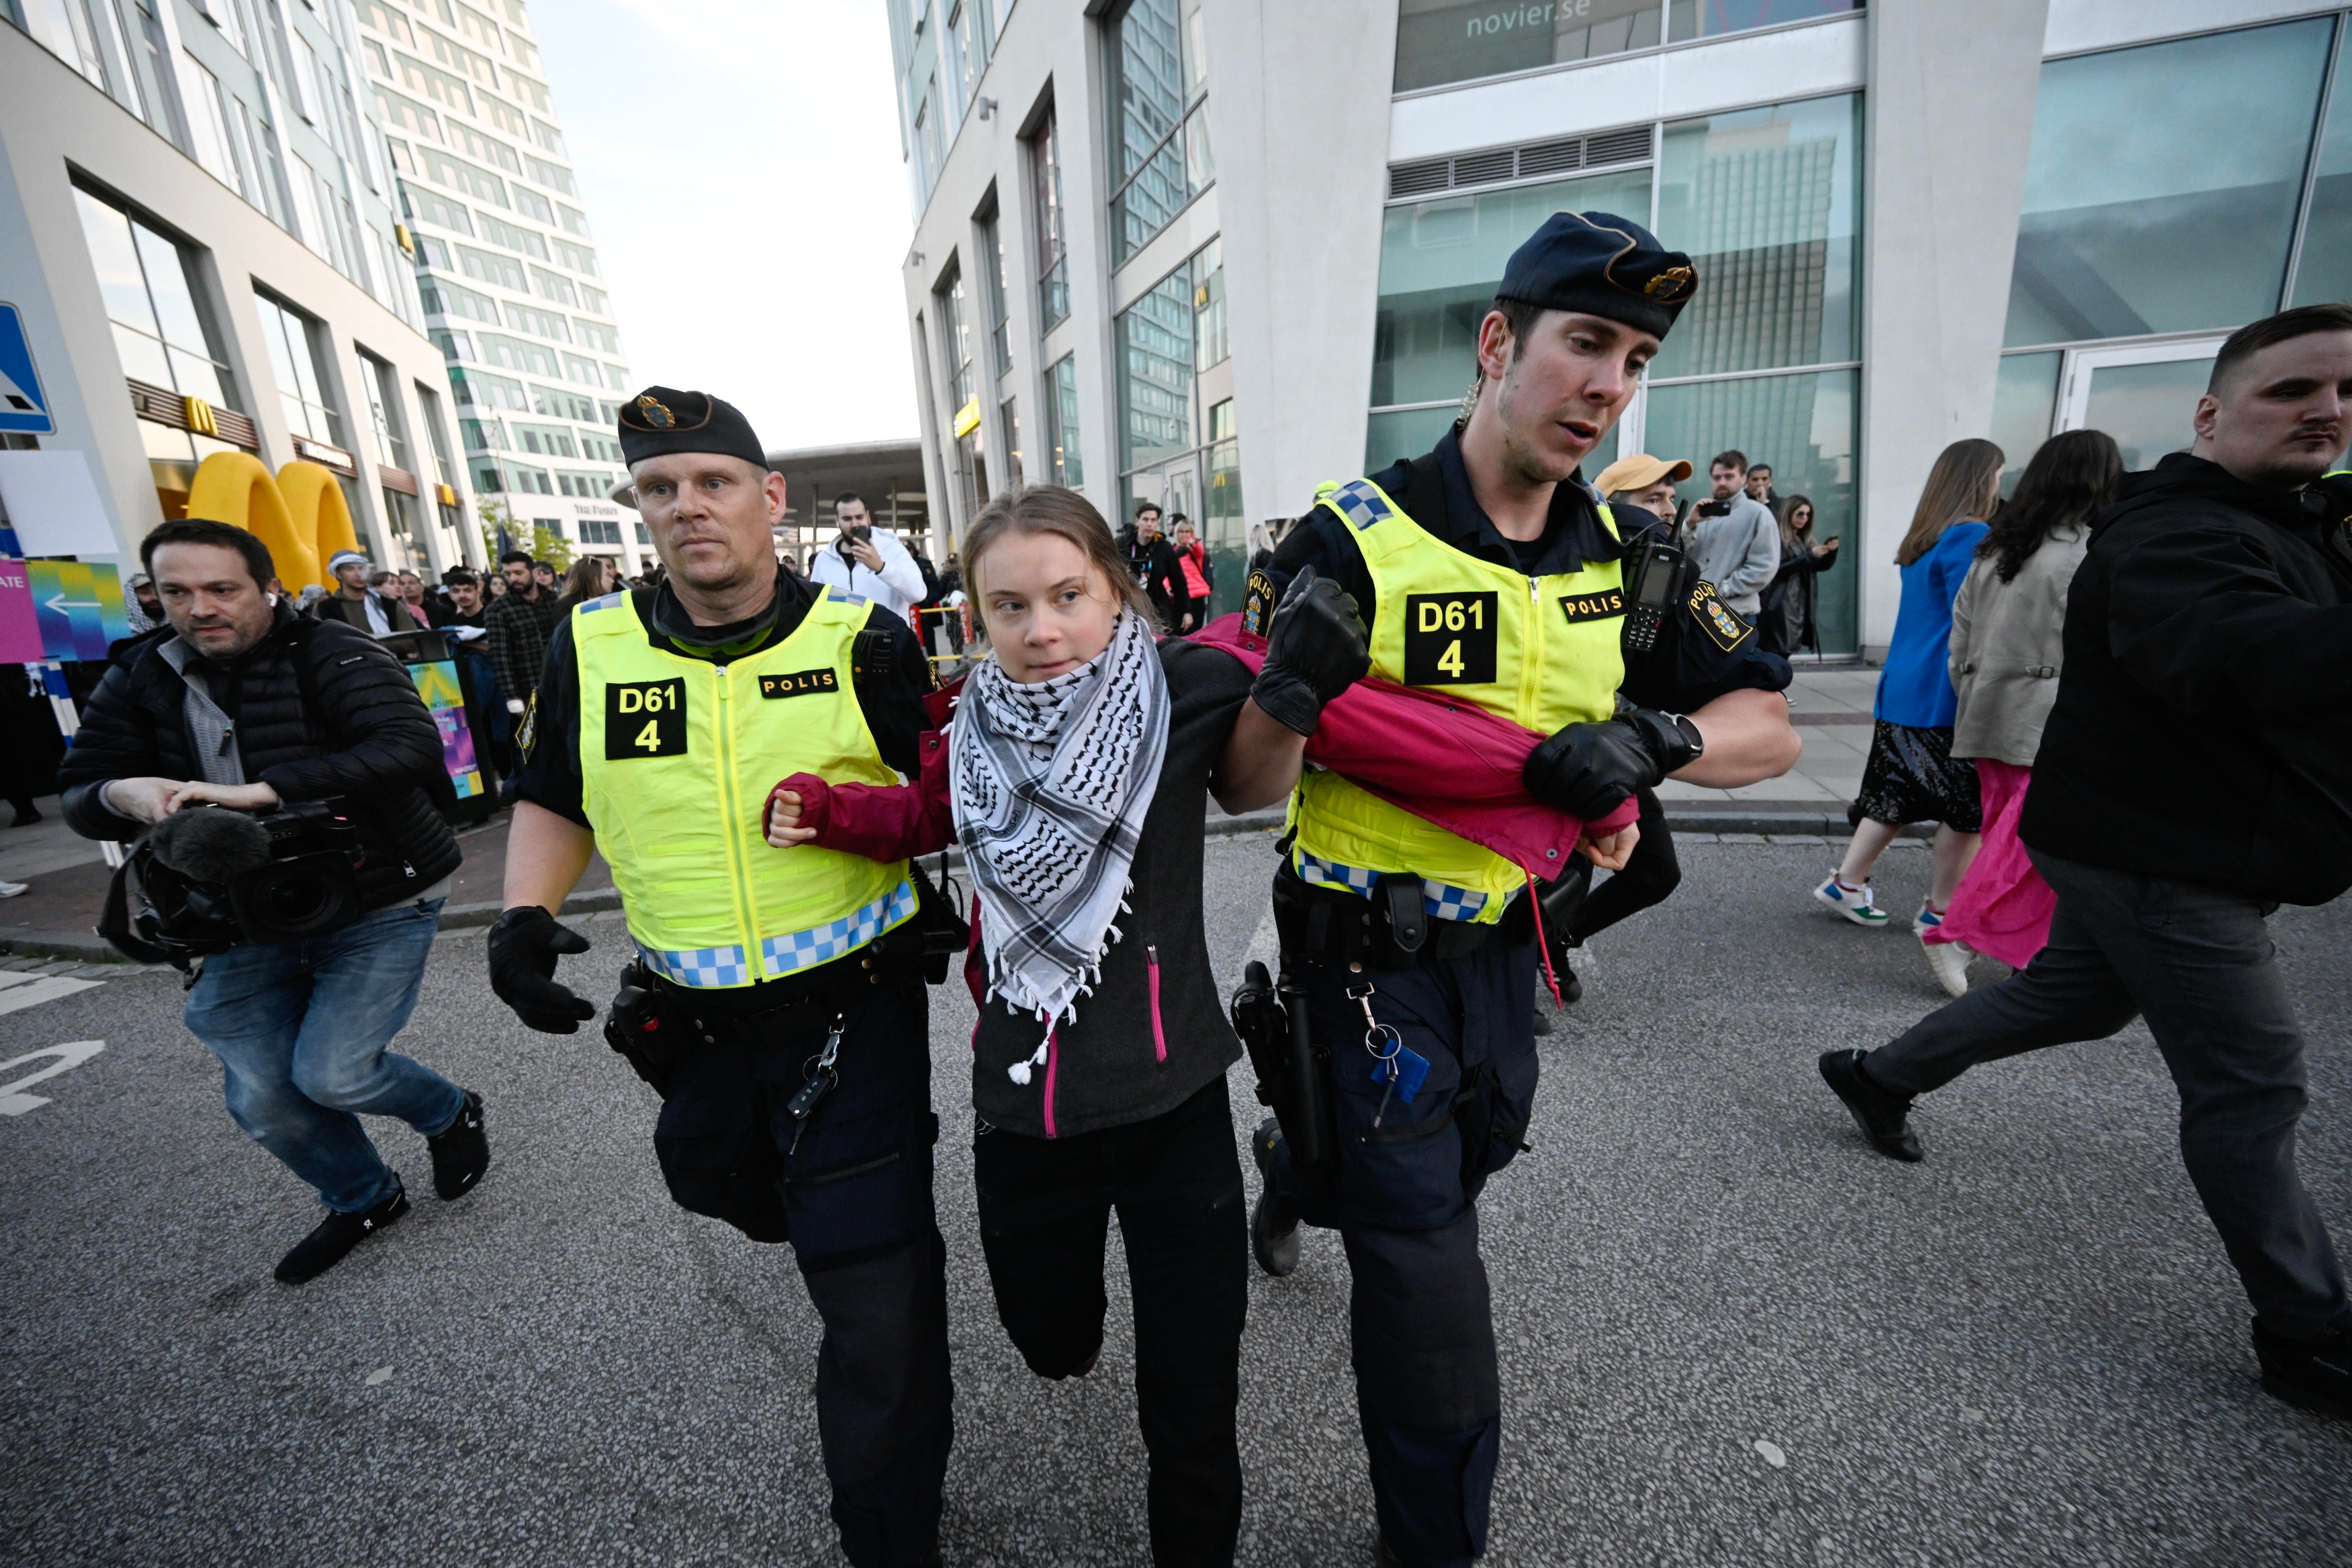 Malmo (Sweden), 11/05/2024.- Swedish climate activist Greta Thunberg (C) is removed by police outside Malmo Arena during a pro-Palestinian rally against the participation of Israel in the 68th Eurovision Song Contest (ESC) in Malmo, Sweden, 11 May 2024. Protesters call for Israel's expulsion from the singing contest over the ongoing situation in the Gaza Strip. In 2022 Russia was prevented from participating in Eurovision over its invasion of Ukraine. (Protestas, Rusia, Suecia, Ucrania) EFE/EPA/Johan Nilsson/TT SWEDEN OUT
